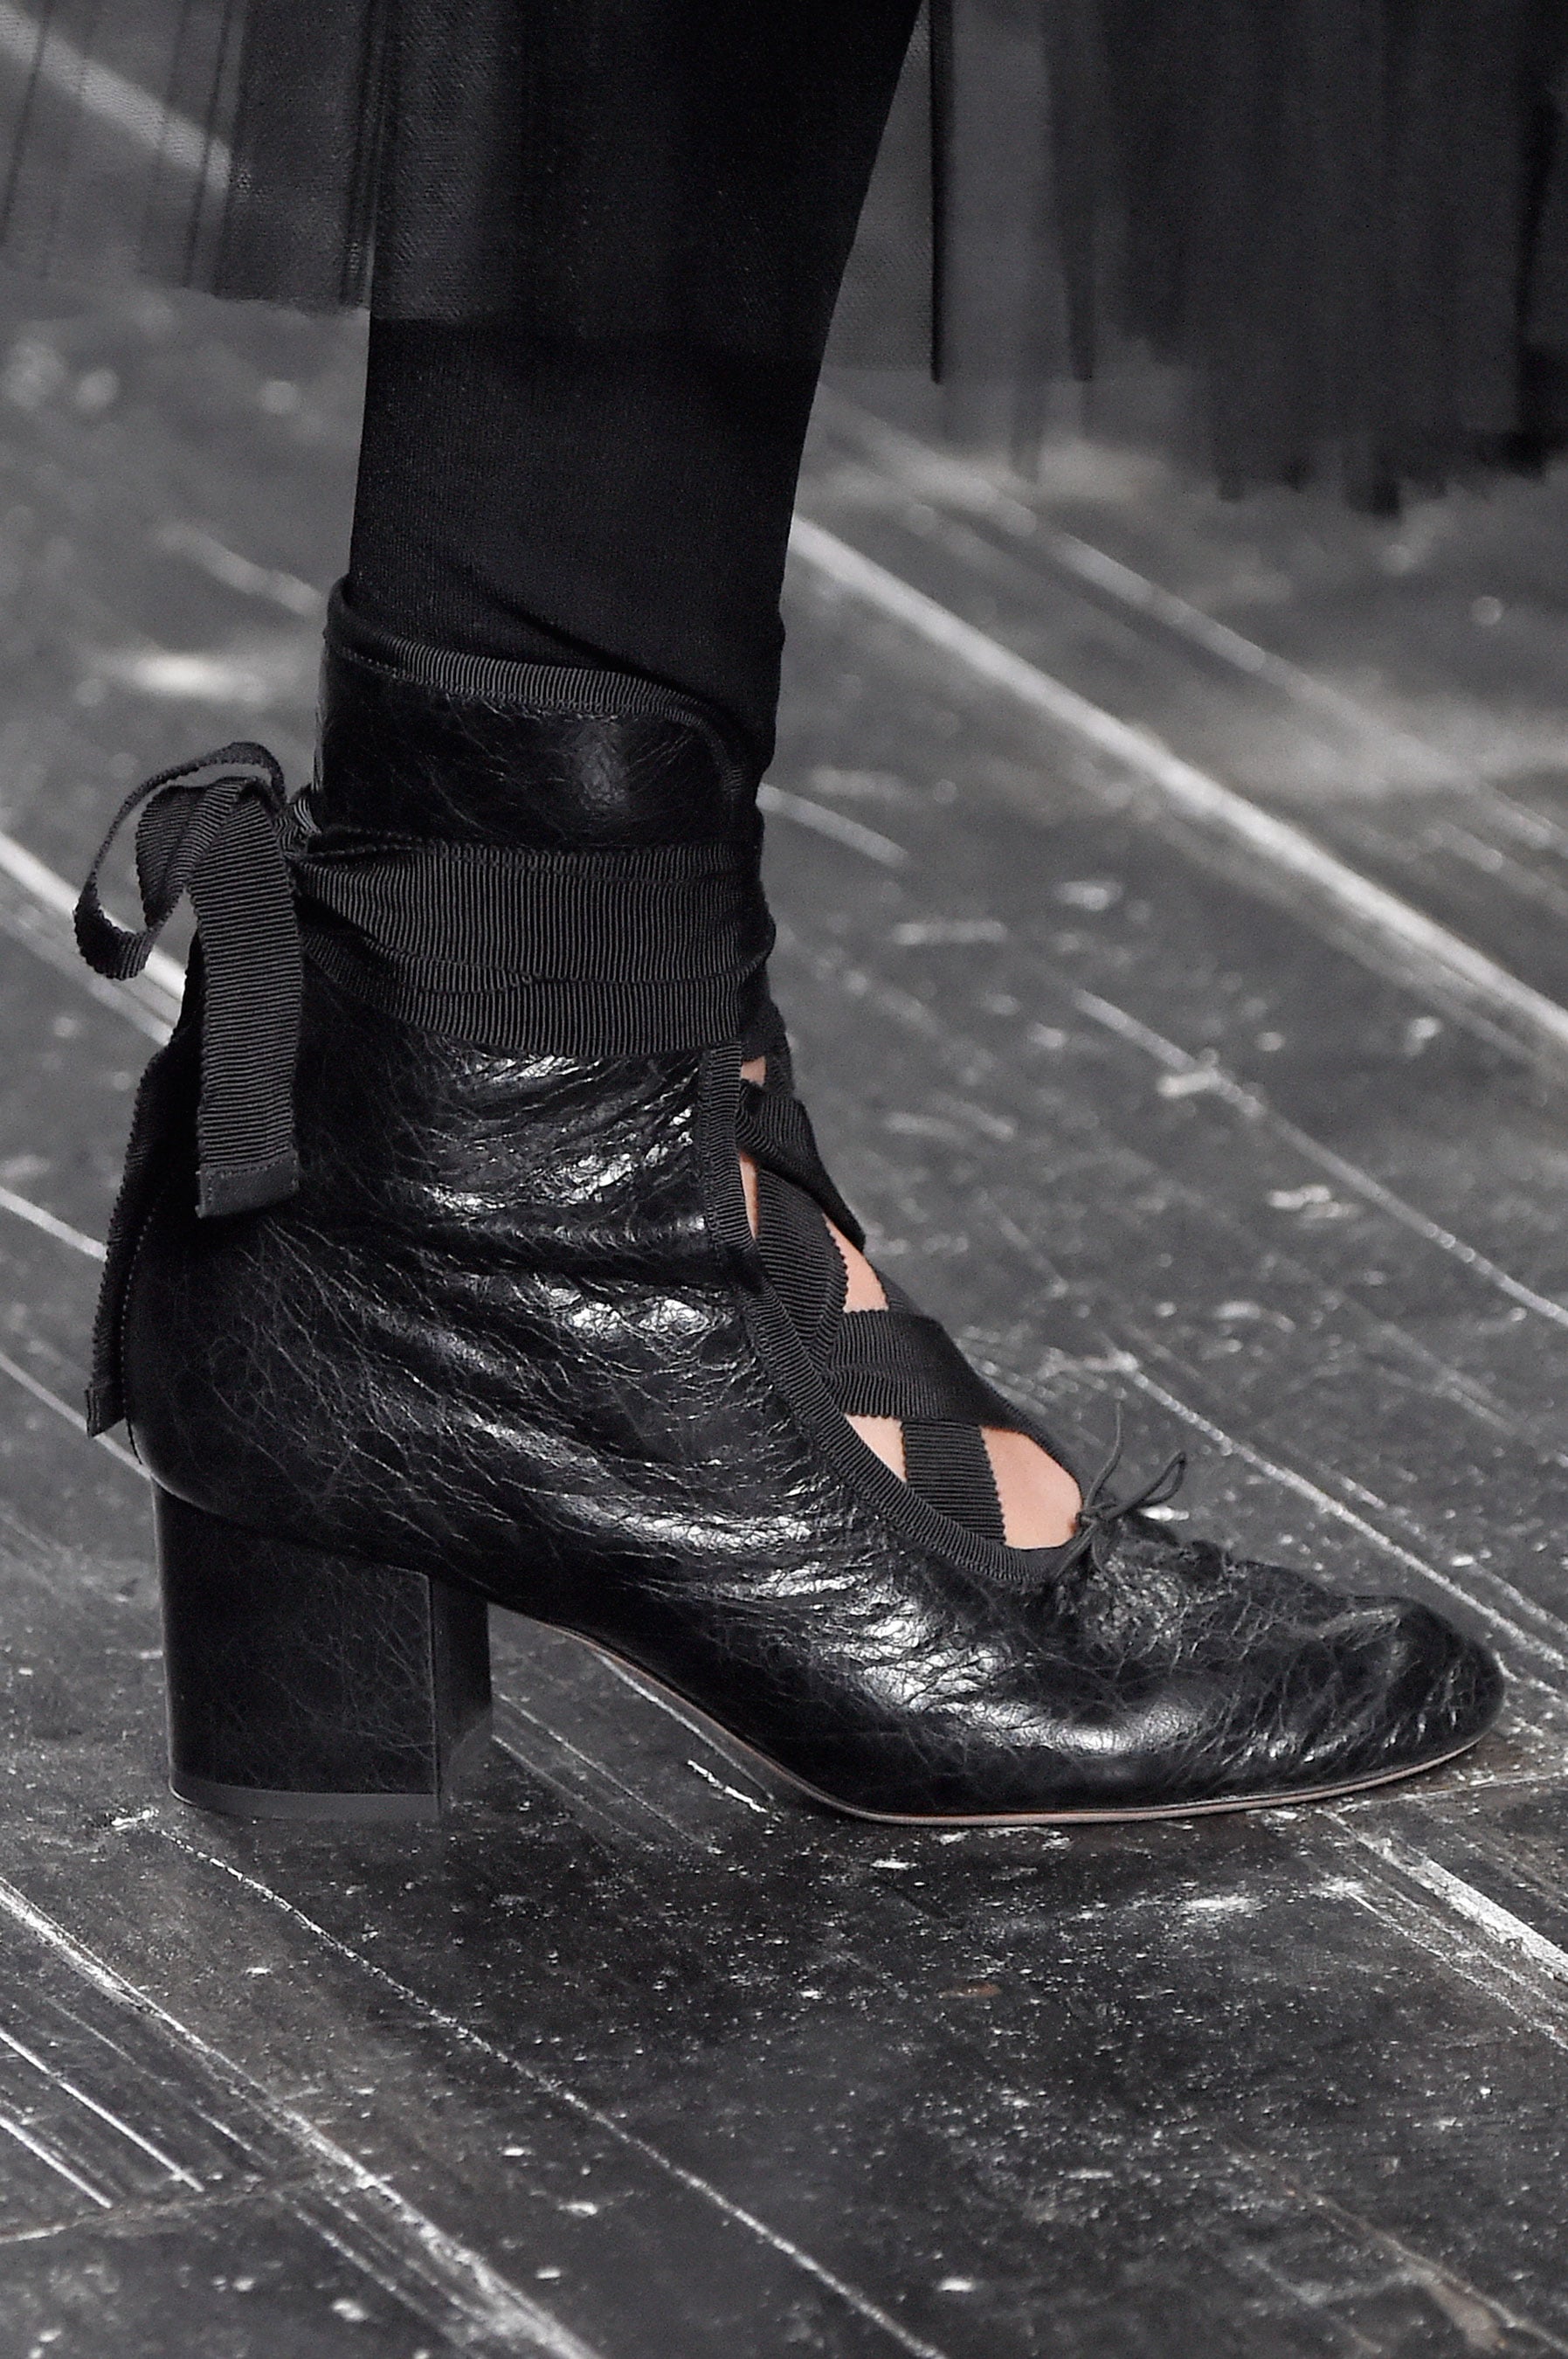 Valentino Fall 2016 | Out the Latest Designer Shoes That Just Walked the at | POPSUGAR Fashion Photo 5